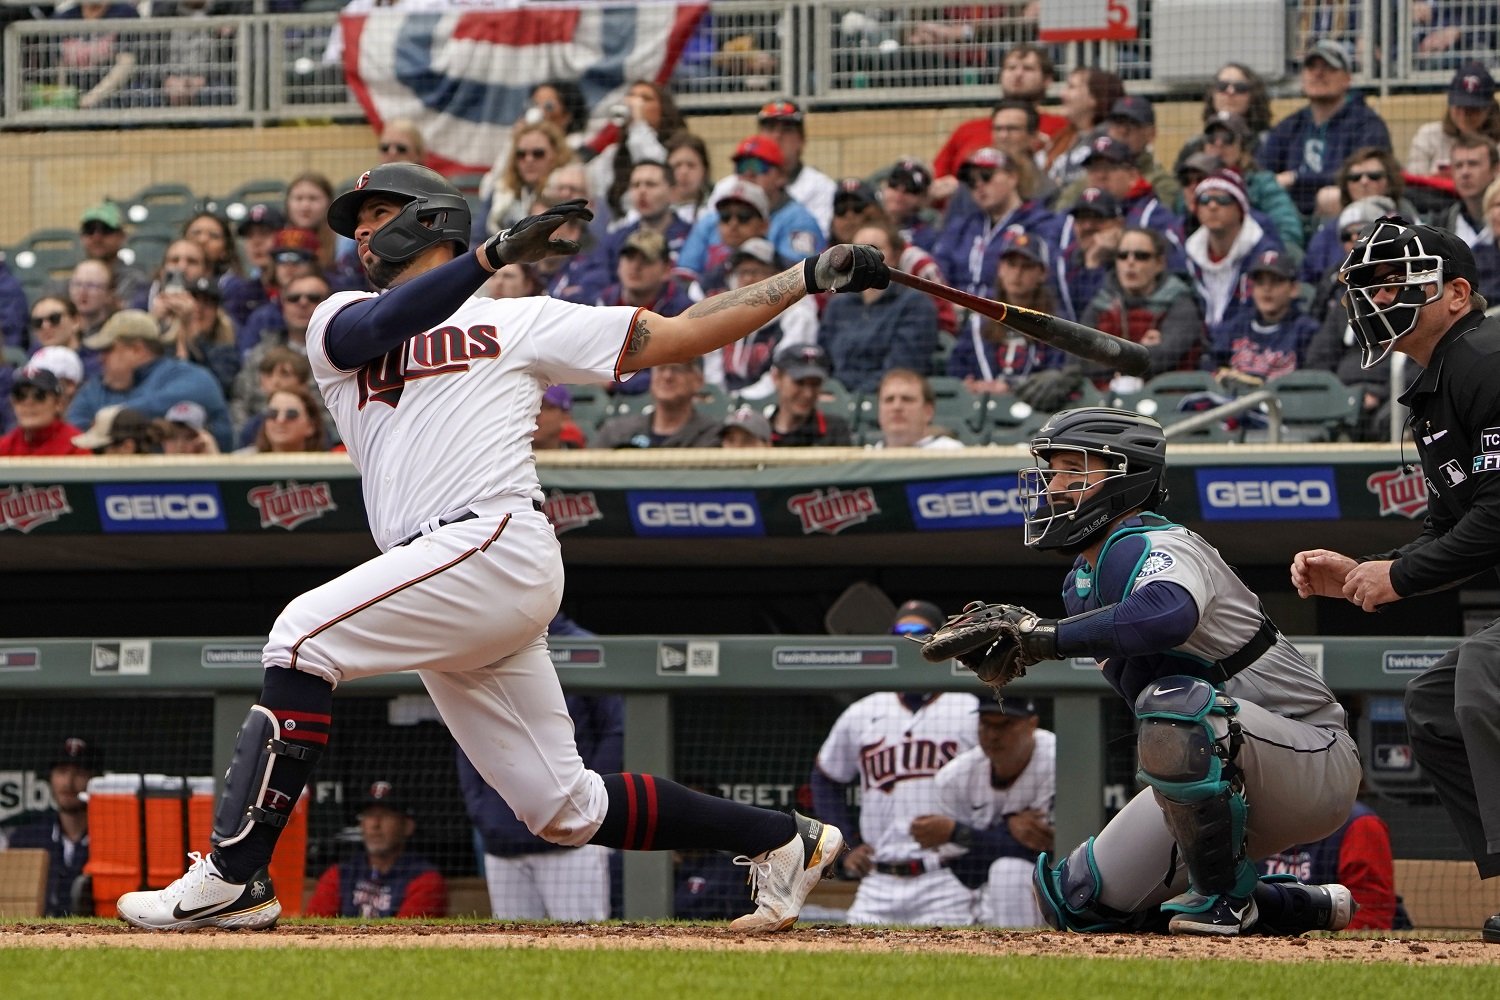 Game Score Twins 10, Mariners 4, Bats Come Alive with Six Home Runs in Twins First Win of 2022 - Twins